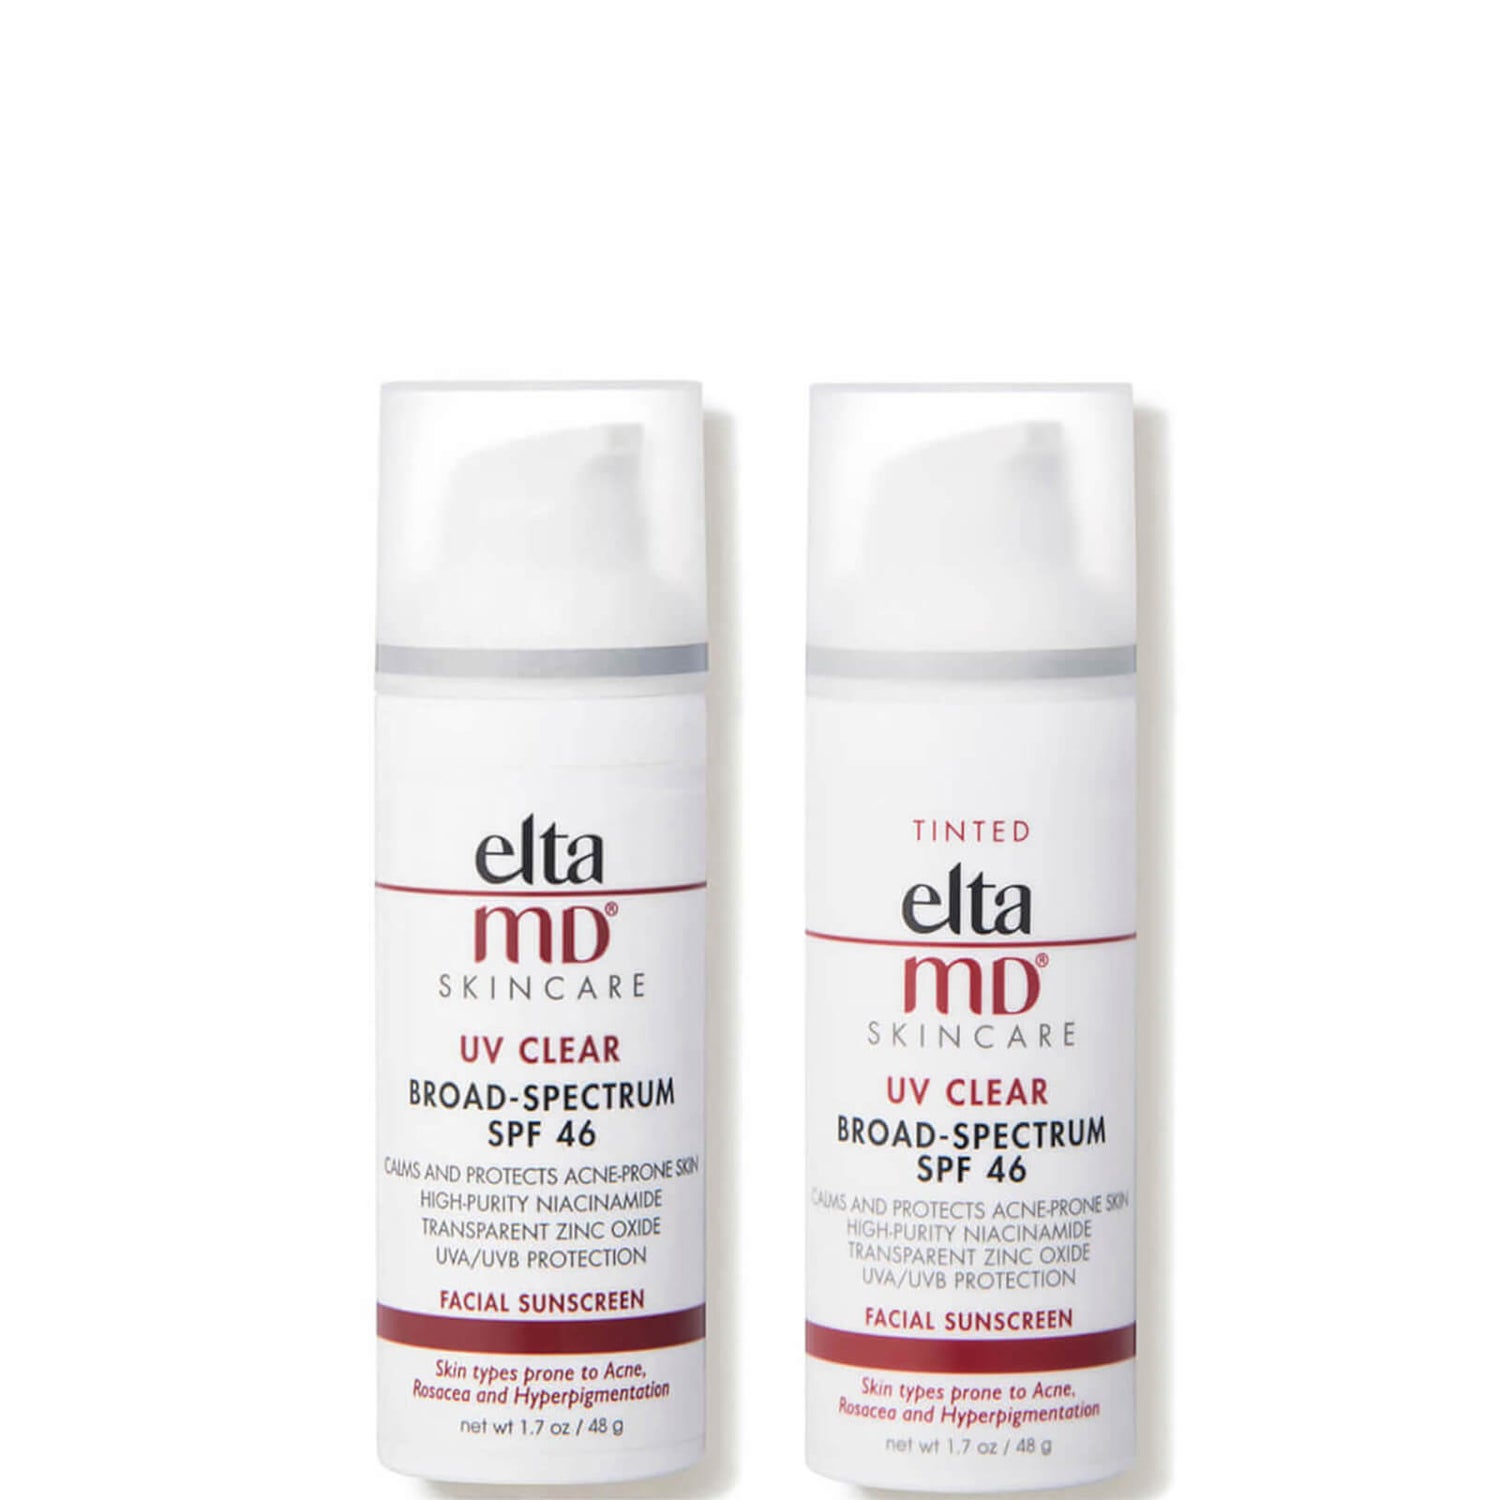 EltaMD Exclusive UV Clear Tinted and Untinted Duo